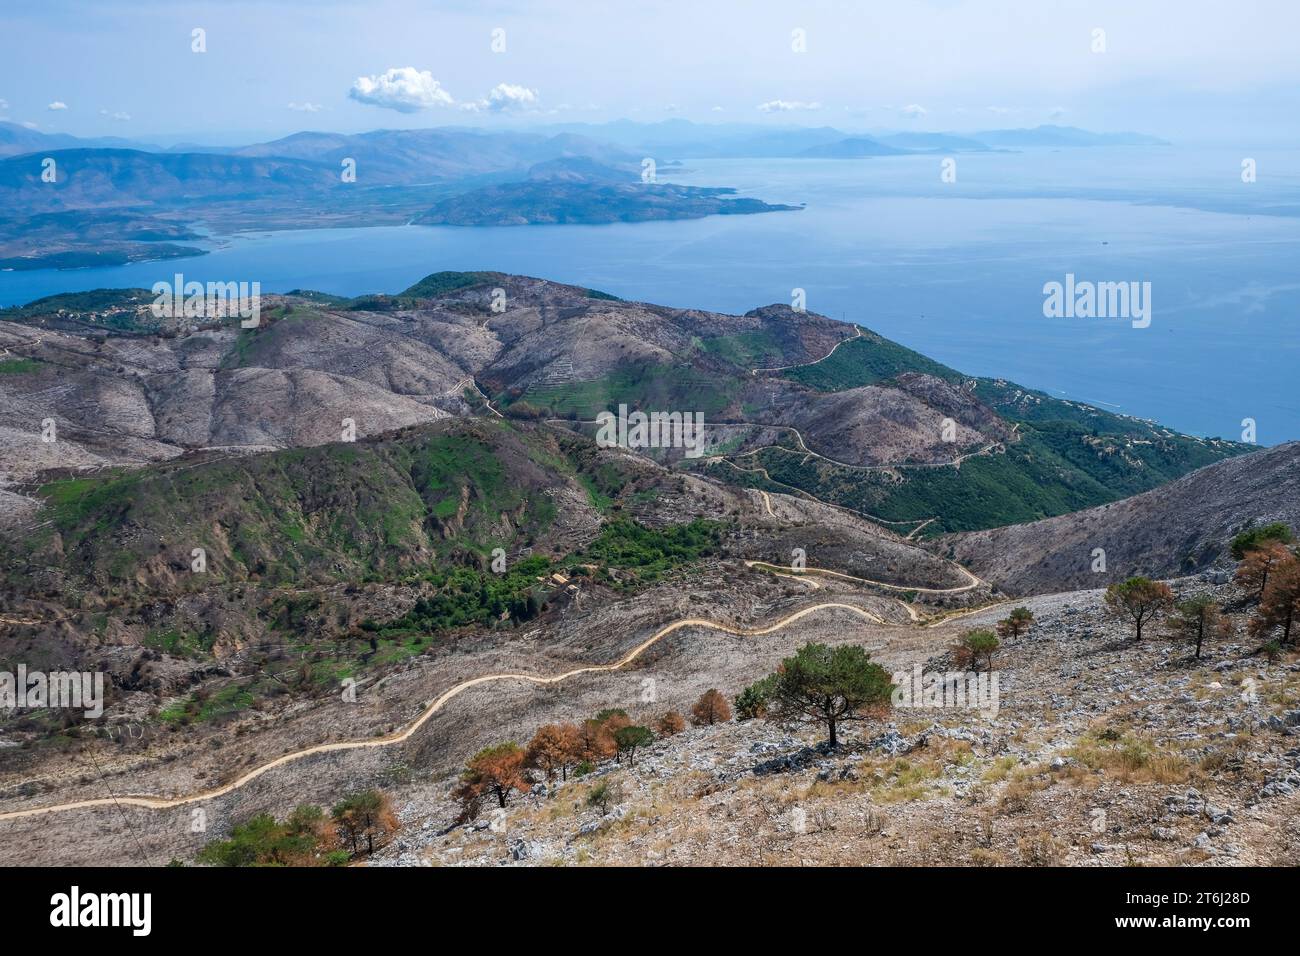 Pantokrator, Corfu, Greece, Mount Pantokrator with view over barren mountain landscape and the Ionian Sea towards mainland Albania. The Pantokrator is with about 917m the highest mountain of the island of Corfu, in the background Albania. Stock Photo